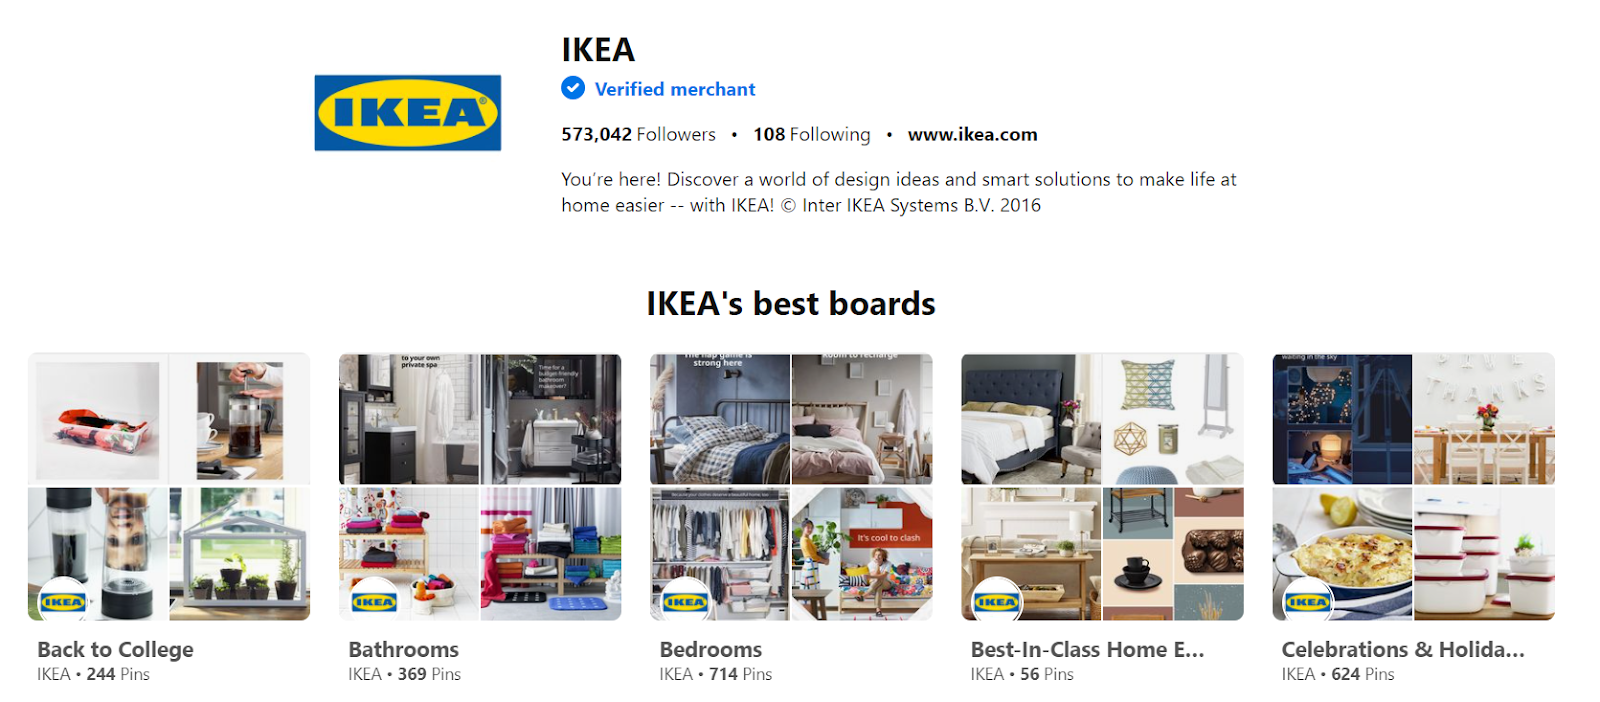 5 Things To Learn From IKEA's Marketing Strategy